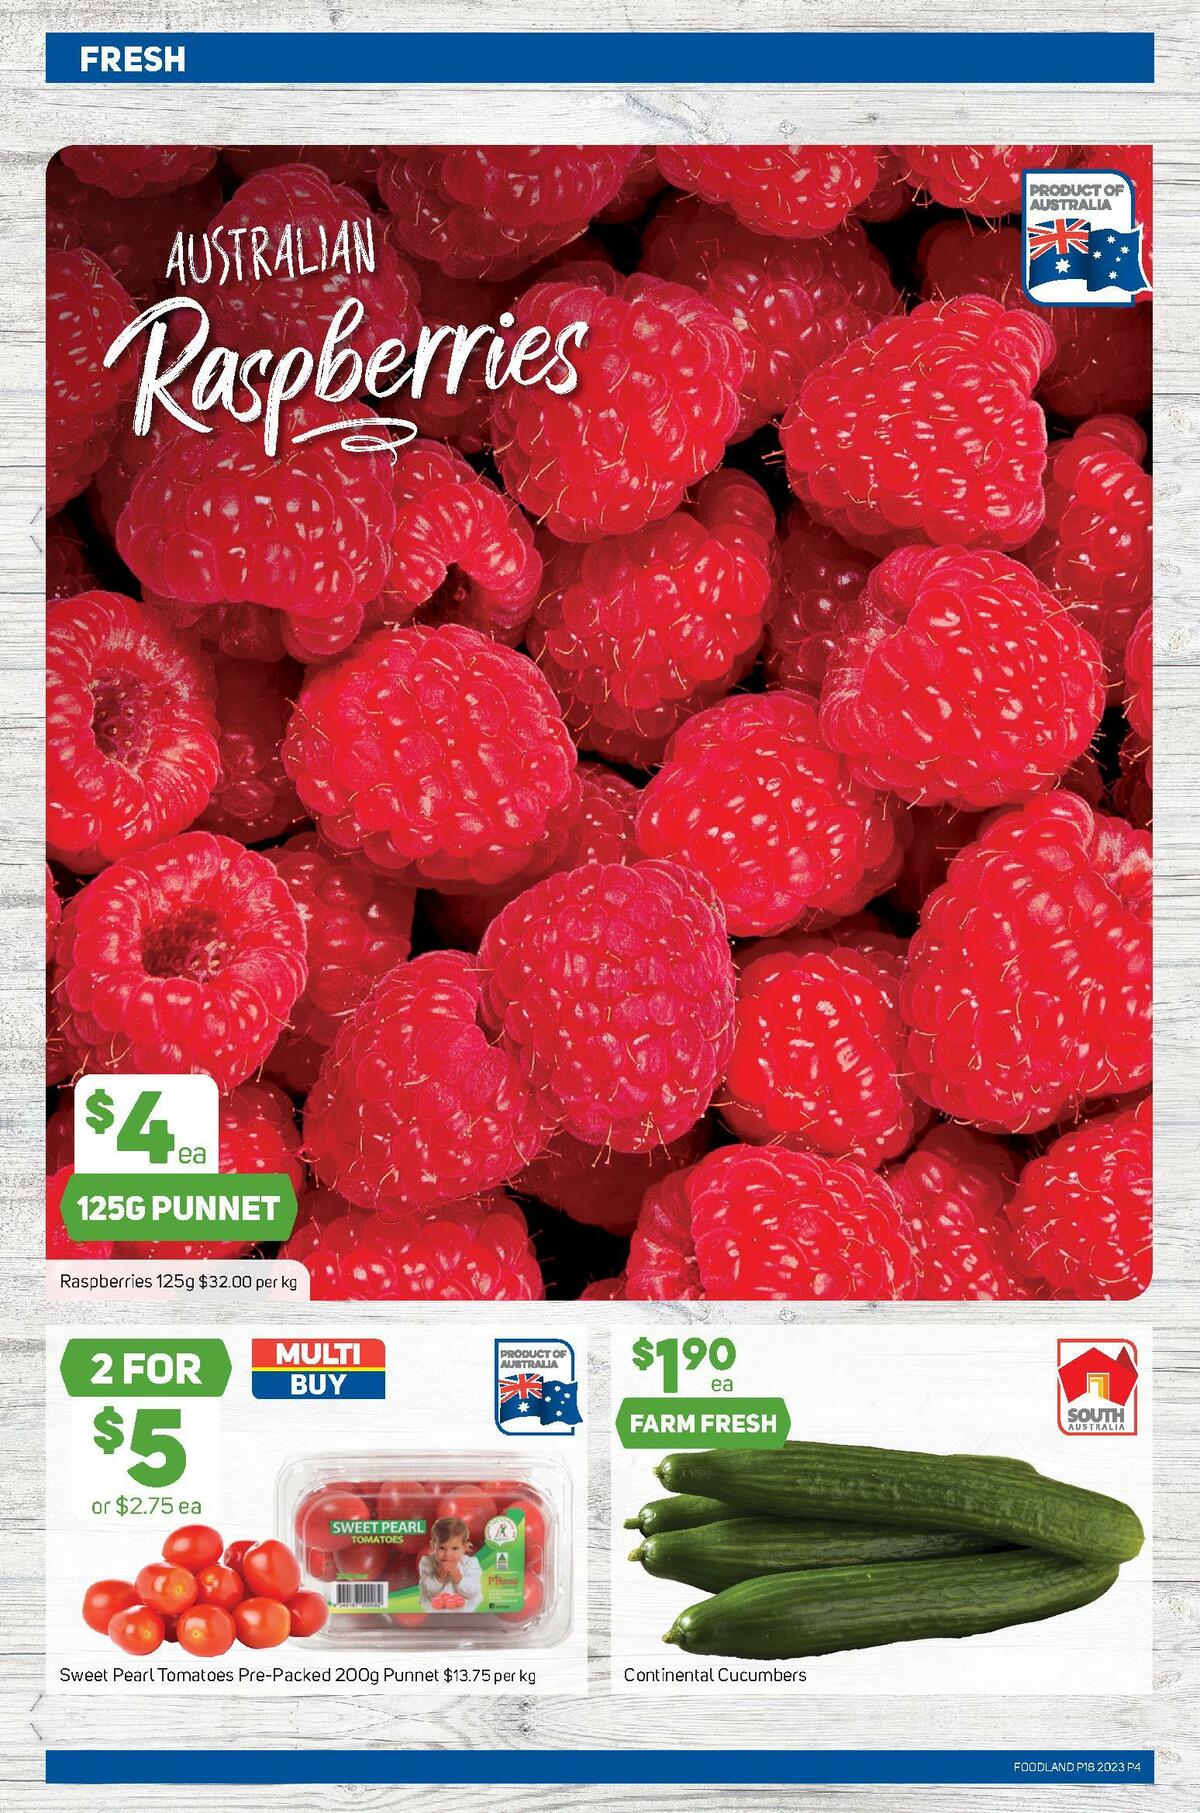 Foodland Catalogues from 3 May